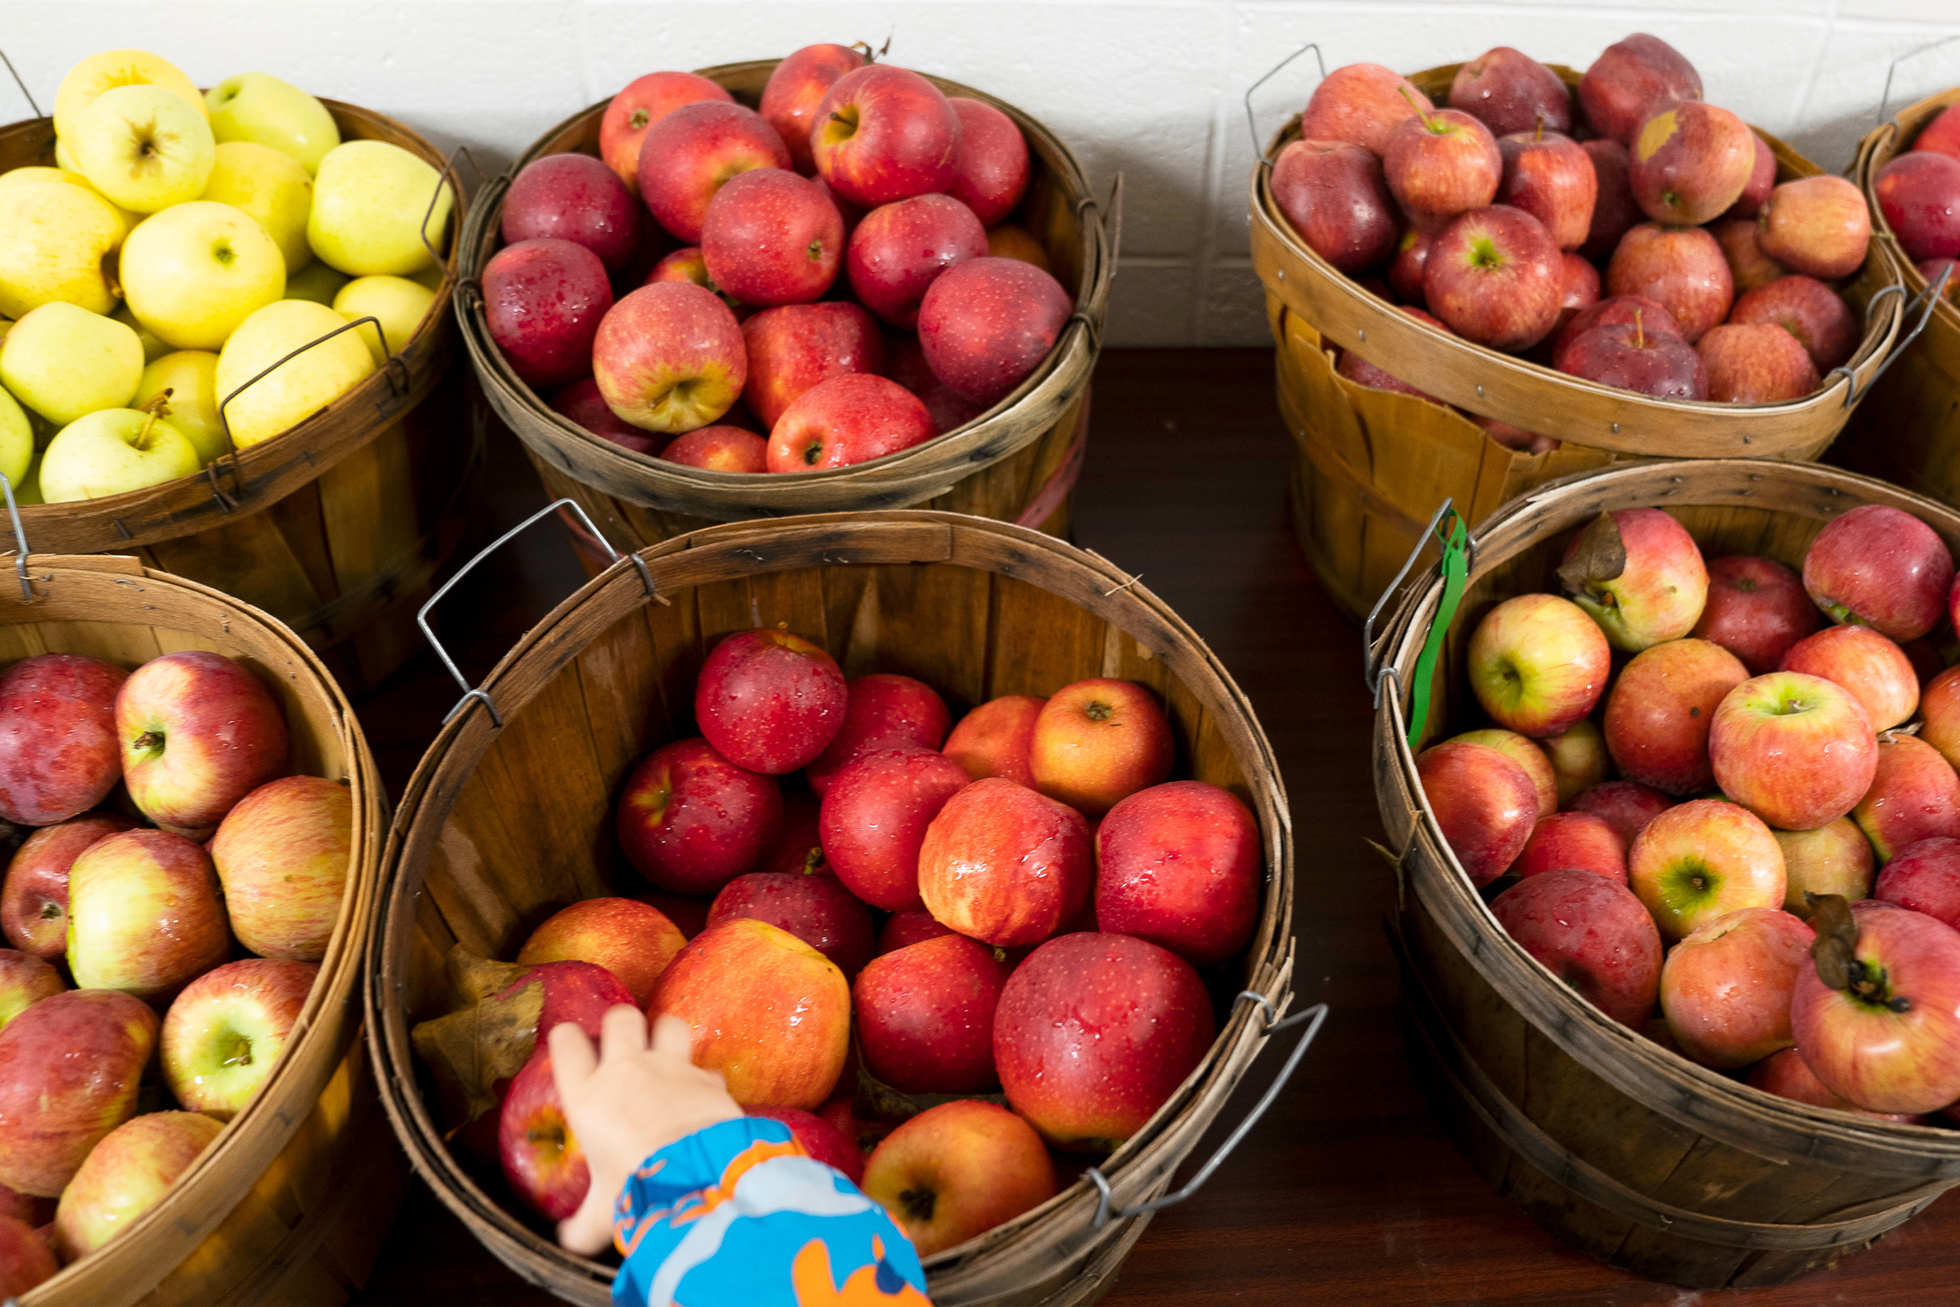 baskets of apples with a child's hand grabbing an apple out of one of the baskets